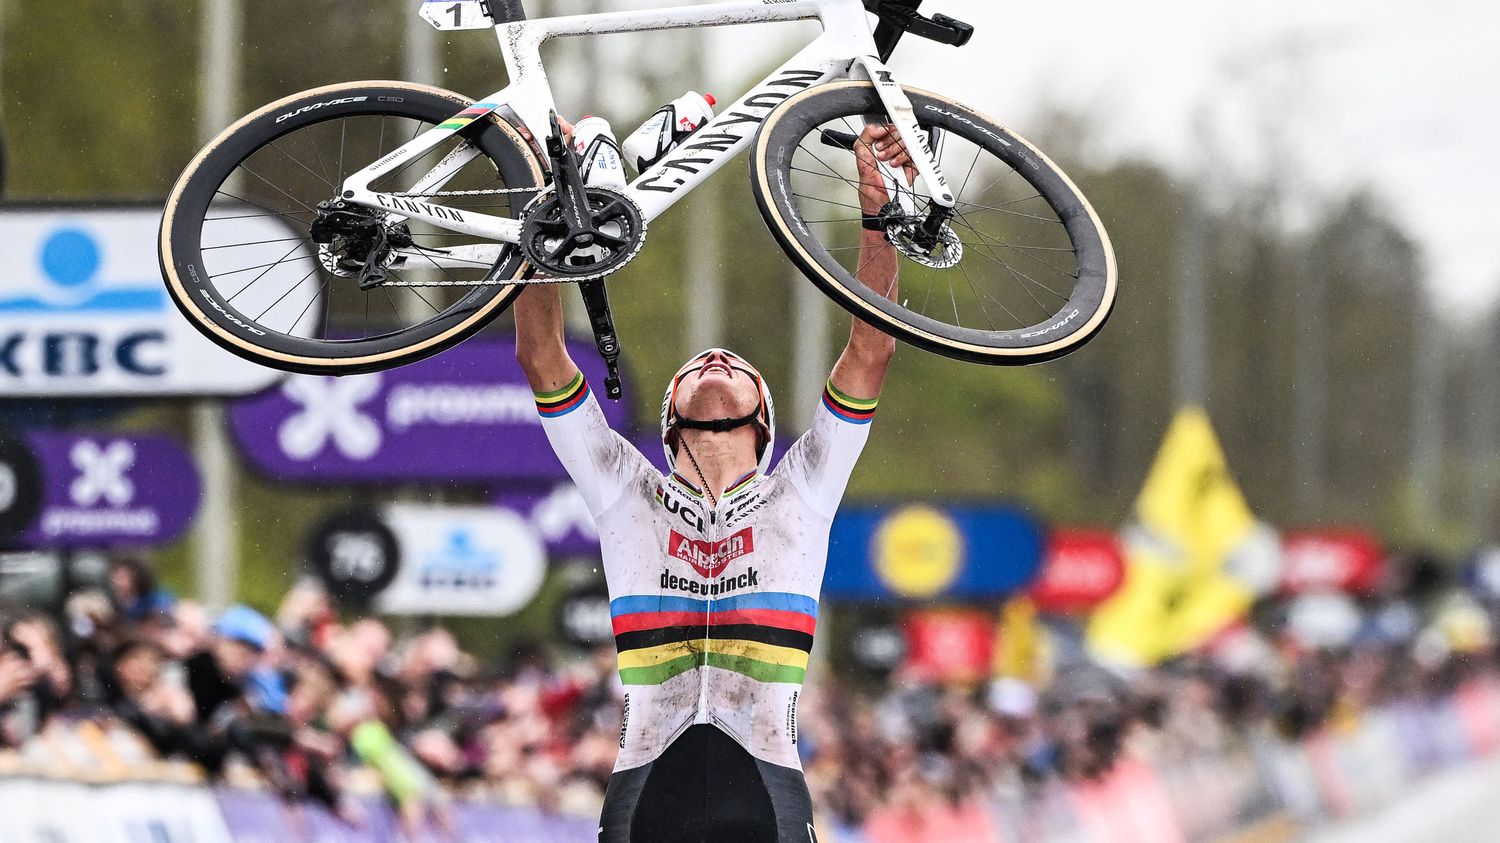 Tour of Flanders: Mathieu van der Poel wins the race to win his fifth monument